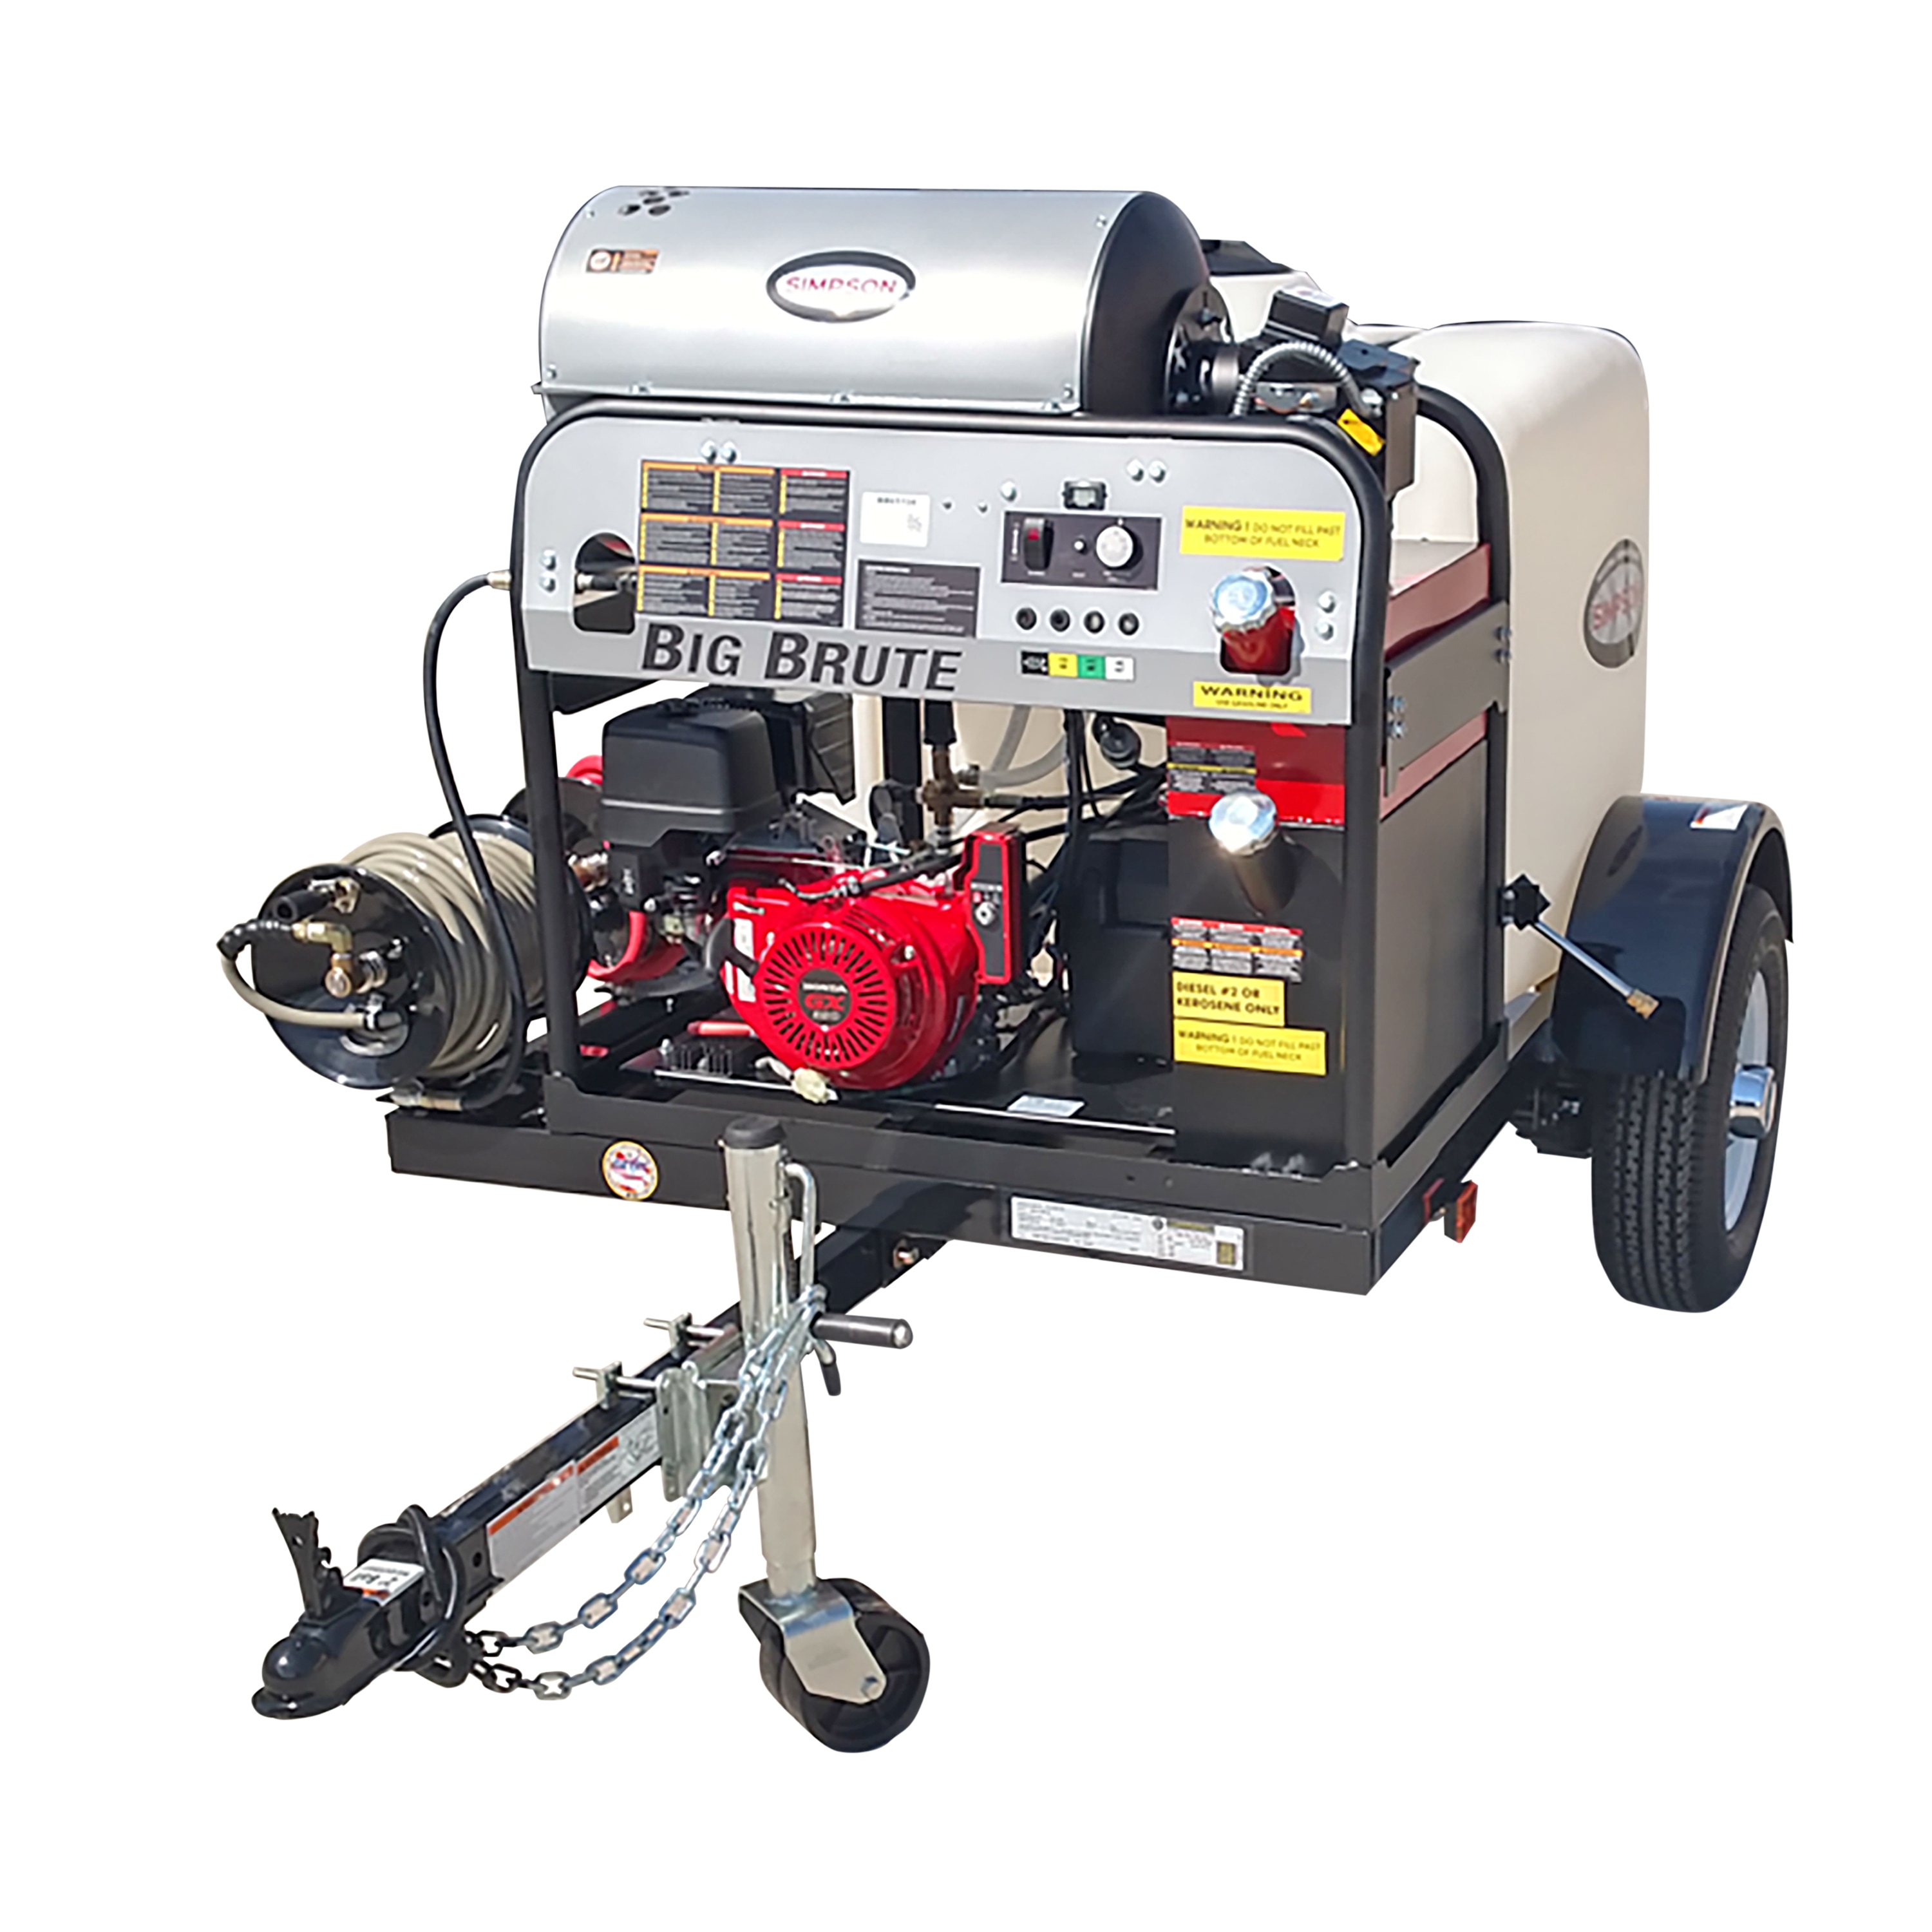 Industrial Pressure Washer Portable Tank & Trailer System - Hot Water (Gas)  